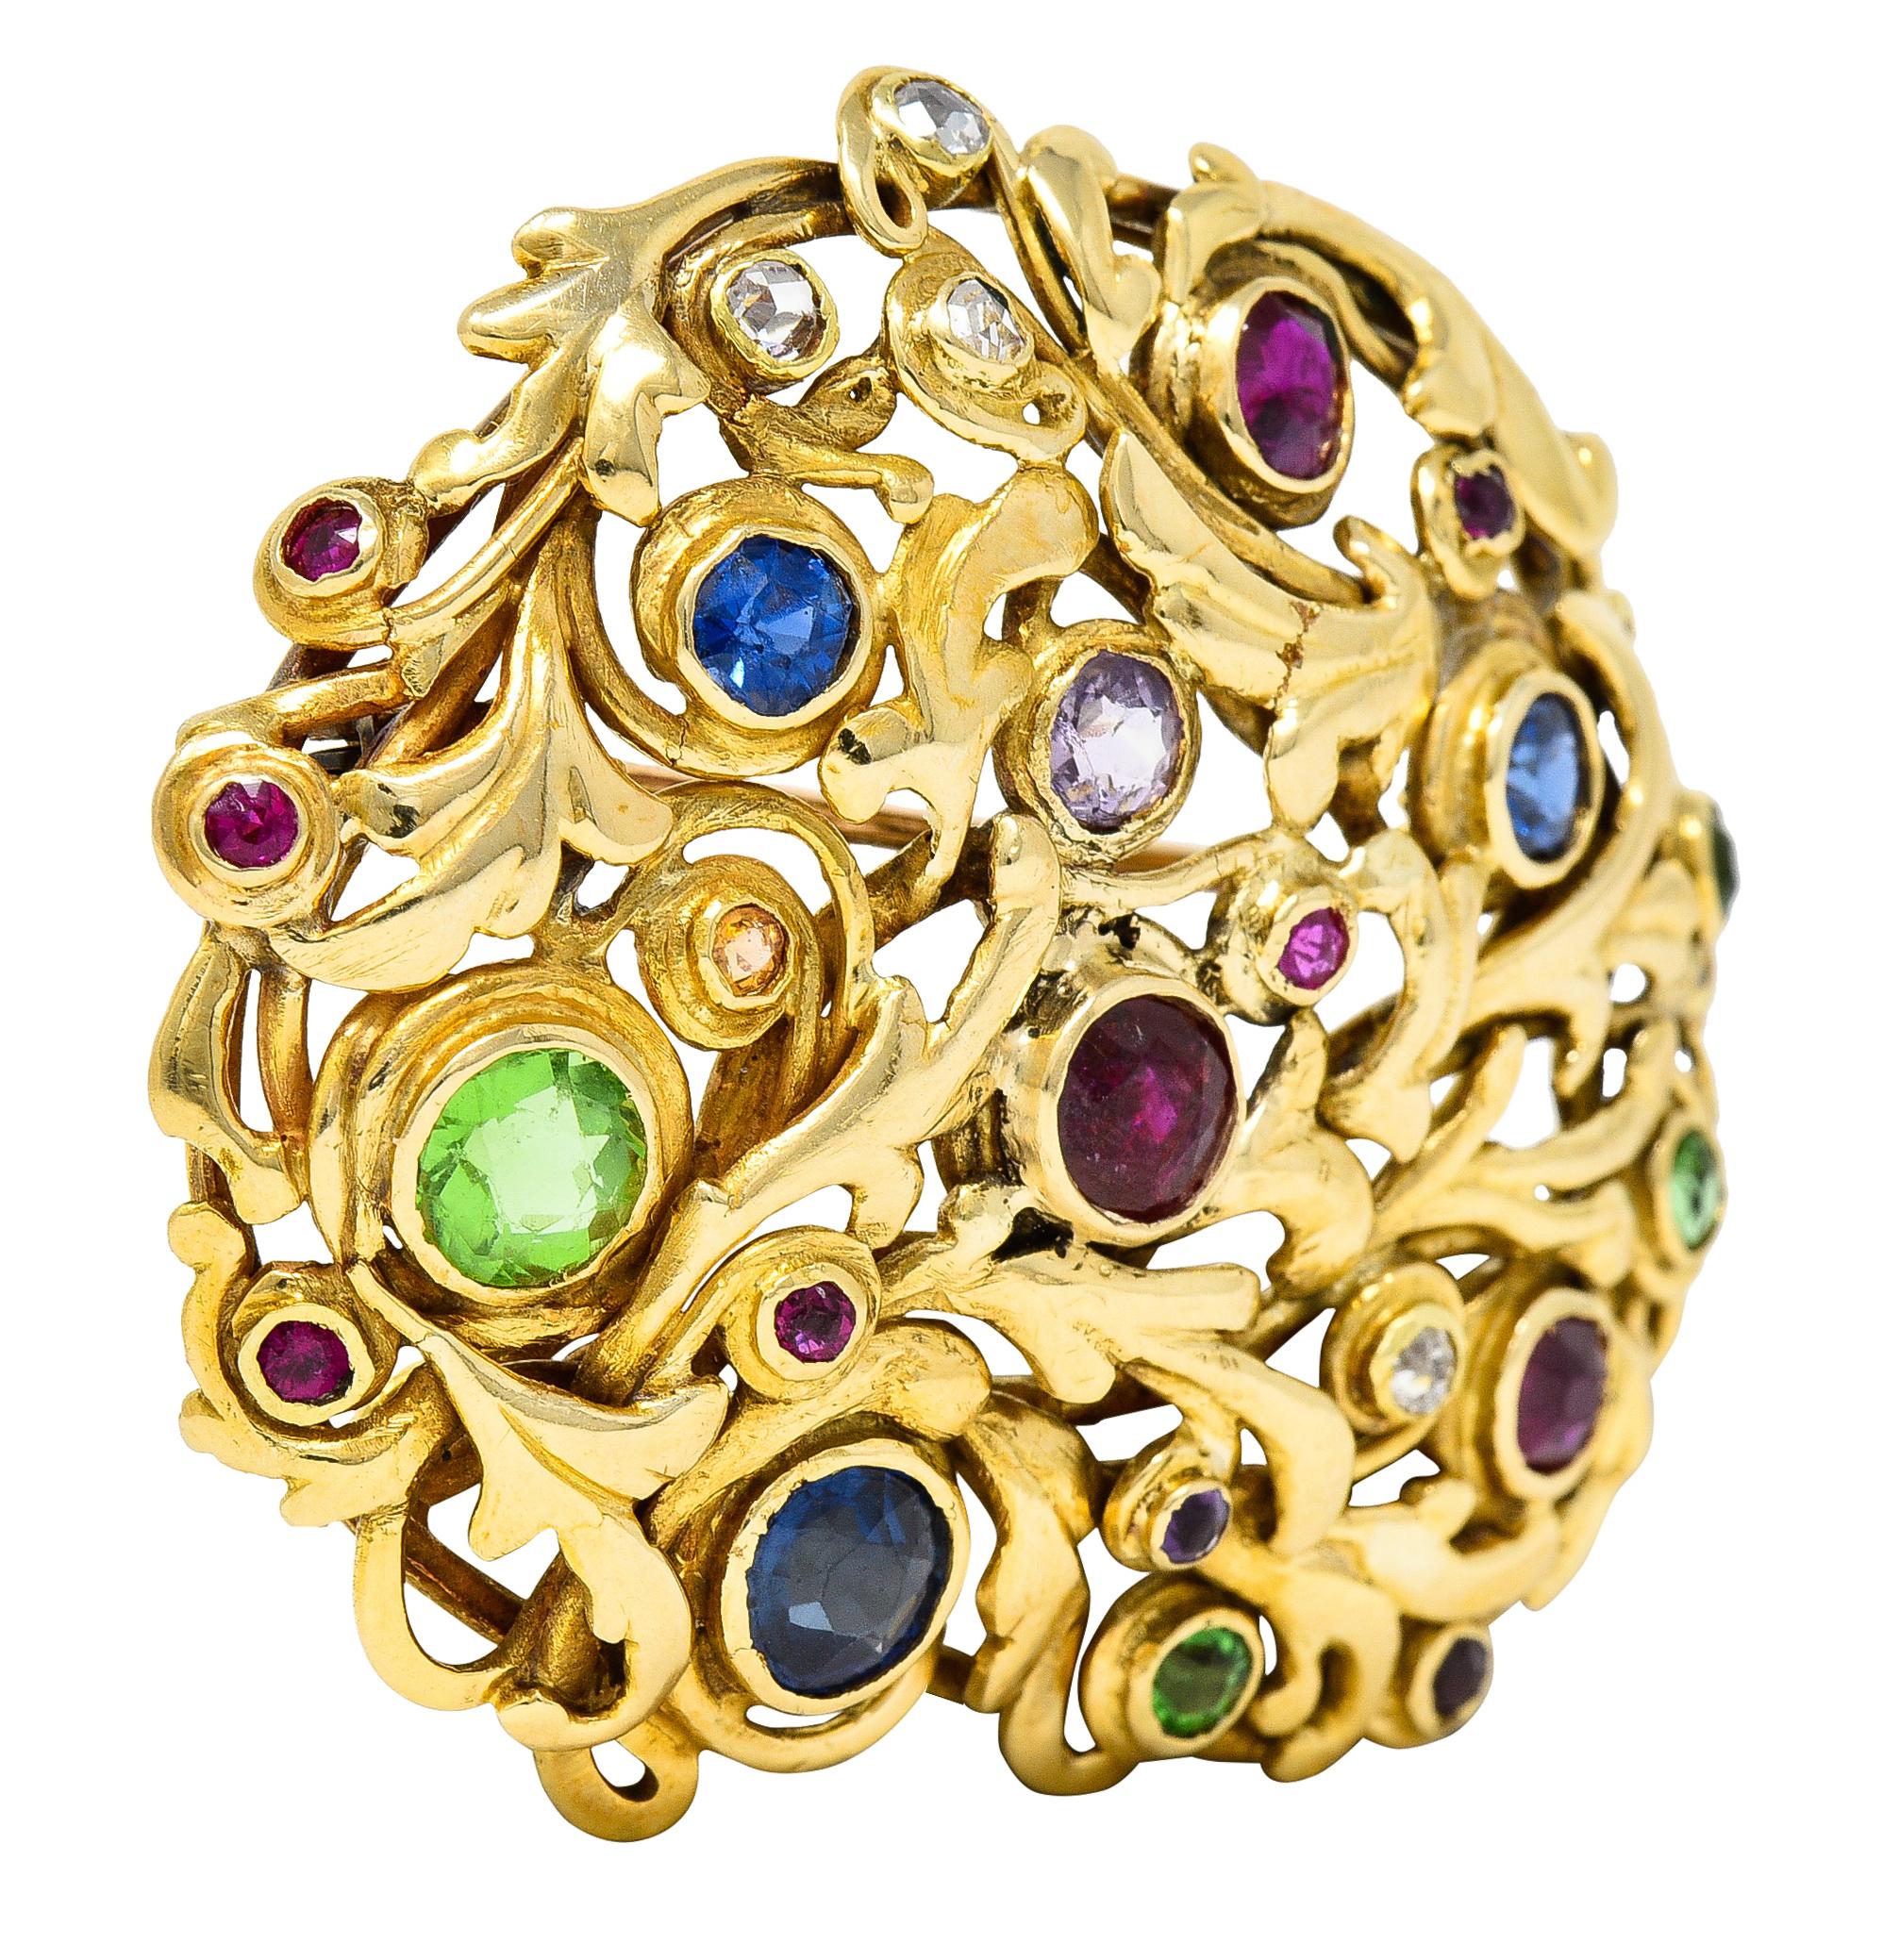 Substantial pendant brooch is designed as stylized foliate undulating and twisting together. Bezel set intermittently by round and cushion cut gemstones. Featuring blue sapphire, red ruby, green garnet, light purple amethyst, rose cut diamonds, and